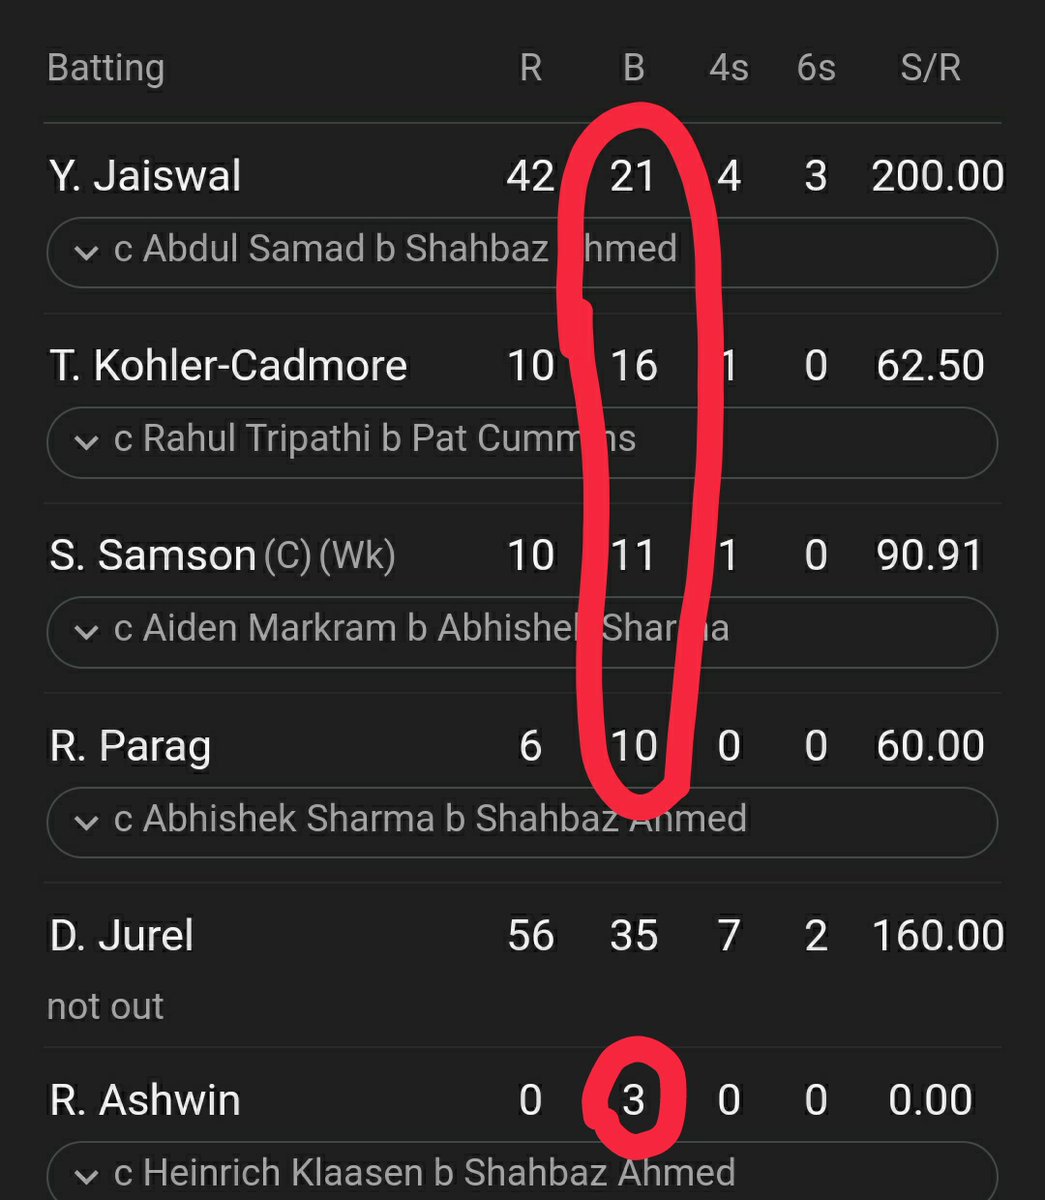 Look at balls faced very less no anchor innings from one end & no temperament. Too much slog slogging won't work in Chepauk